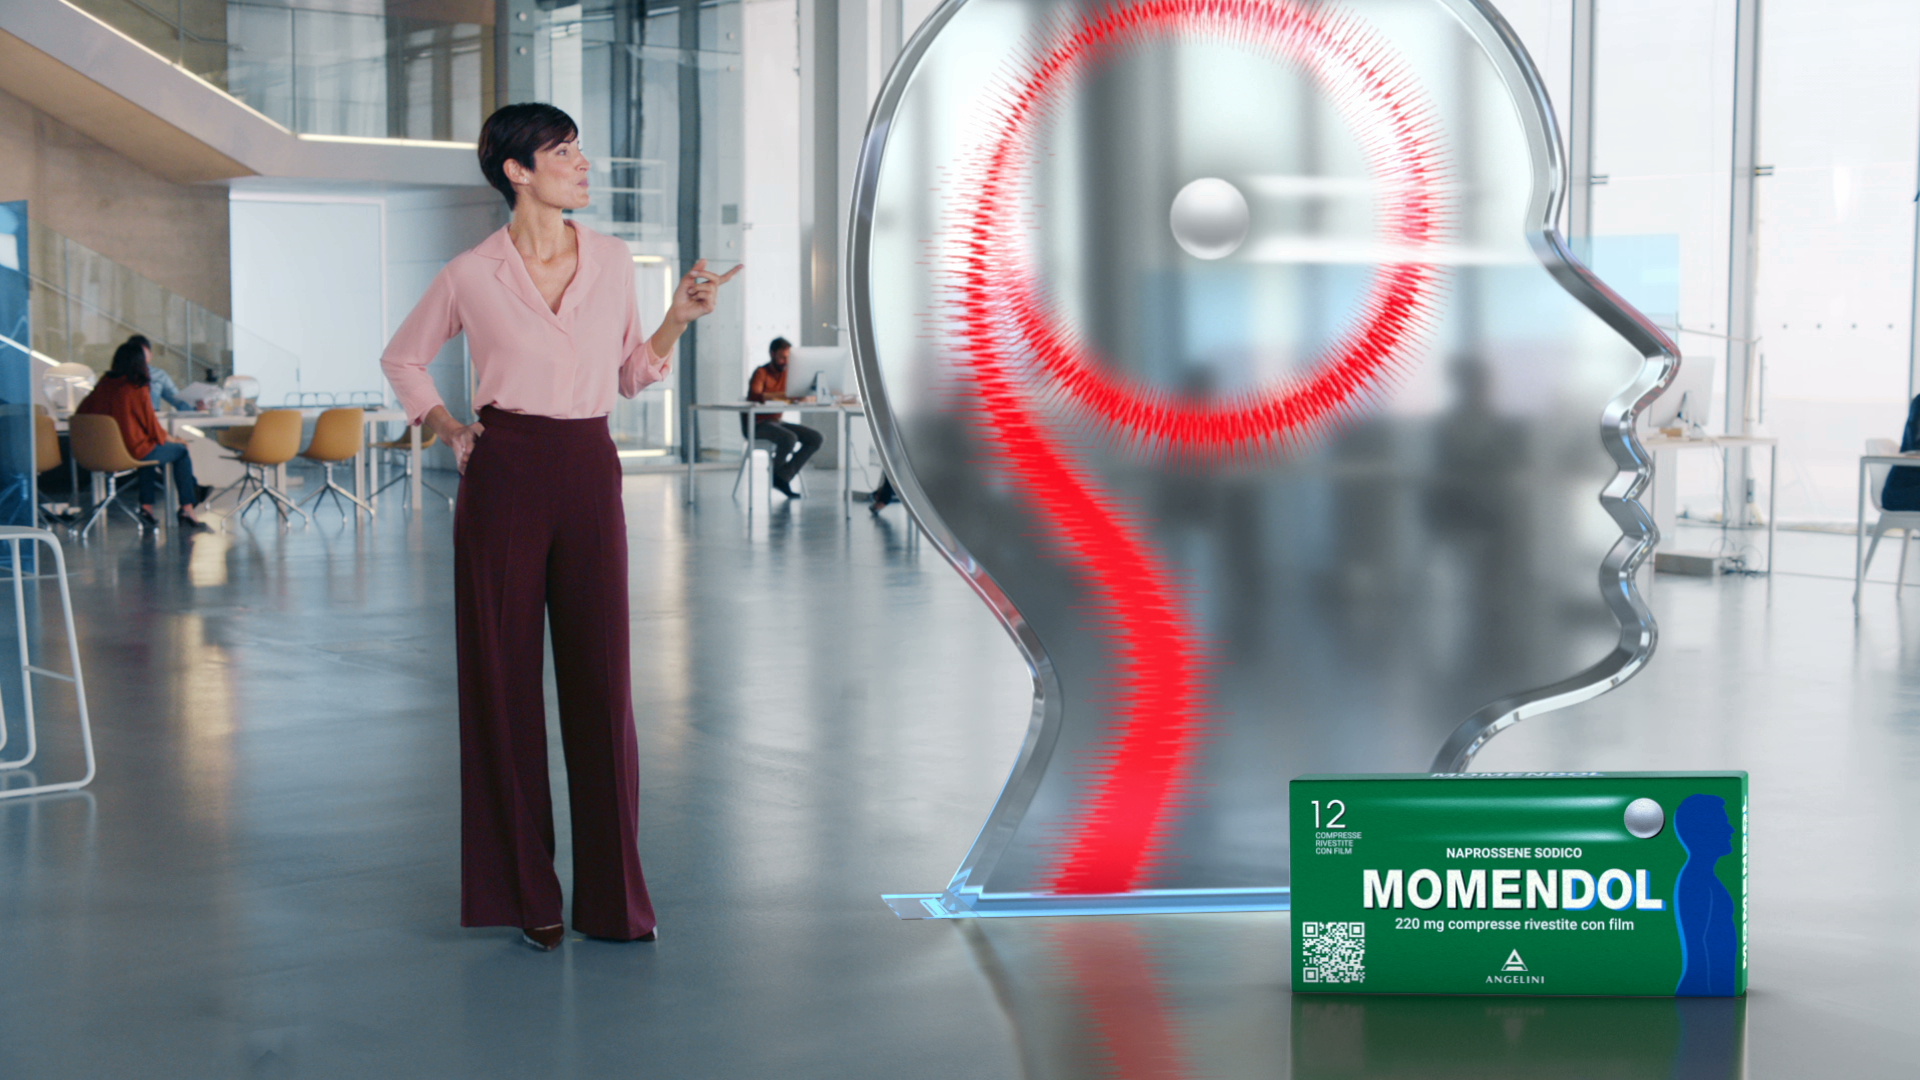 RELIEF FROM PAIN FOR UP TO 12 HOURS WITH MOMENDOL AD CREATED BY  ARMANDO TESTA